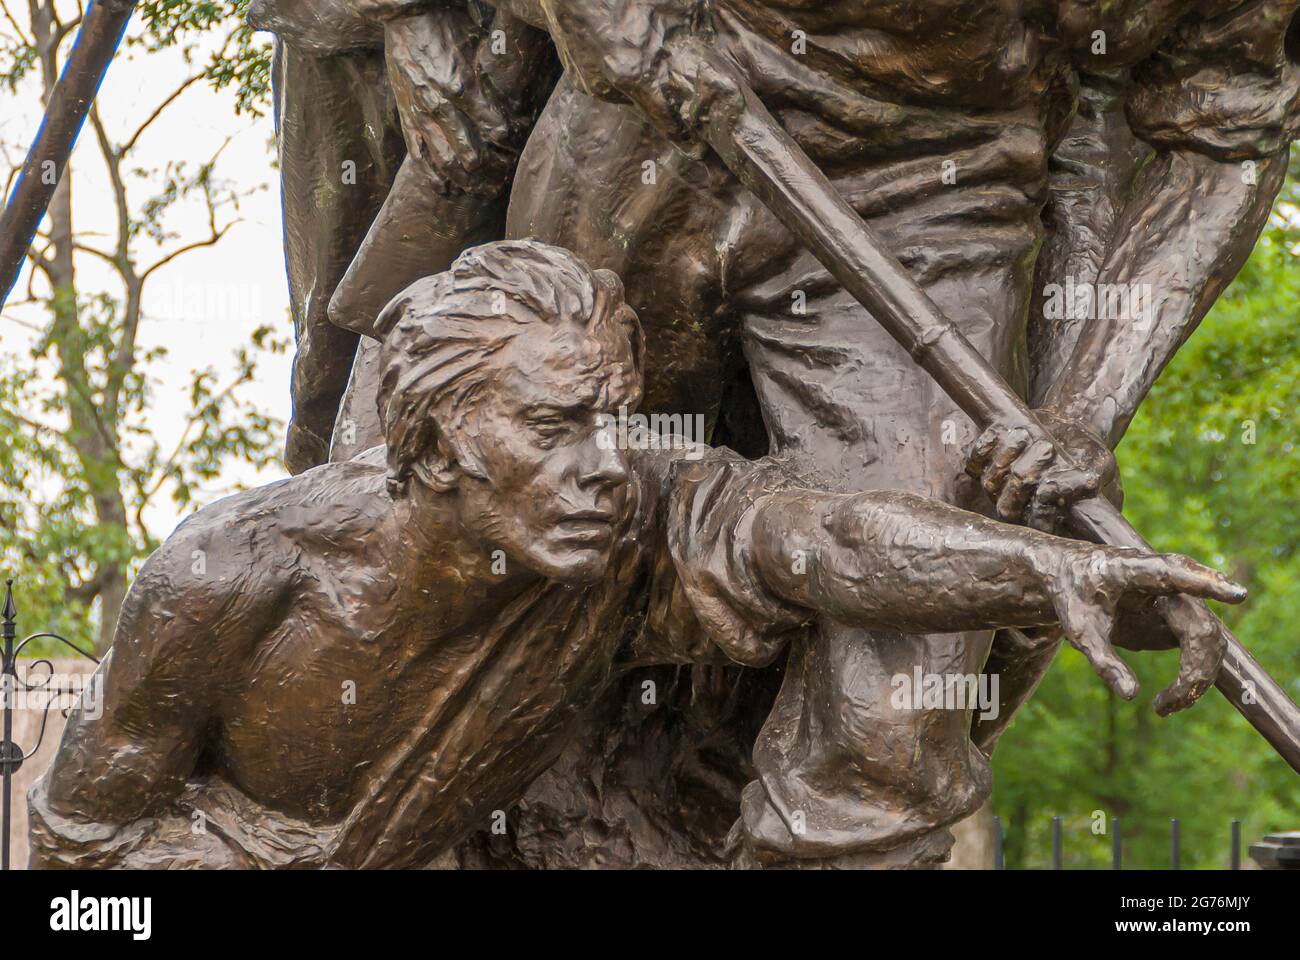 Gettysburg, PA, USA - June 14, 2008: Battlefield monuments. Closeup of detail of the North Carolina State monument showing the wounded soldier pointin Stock Photo